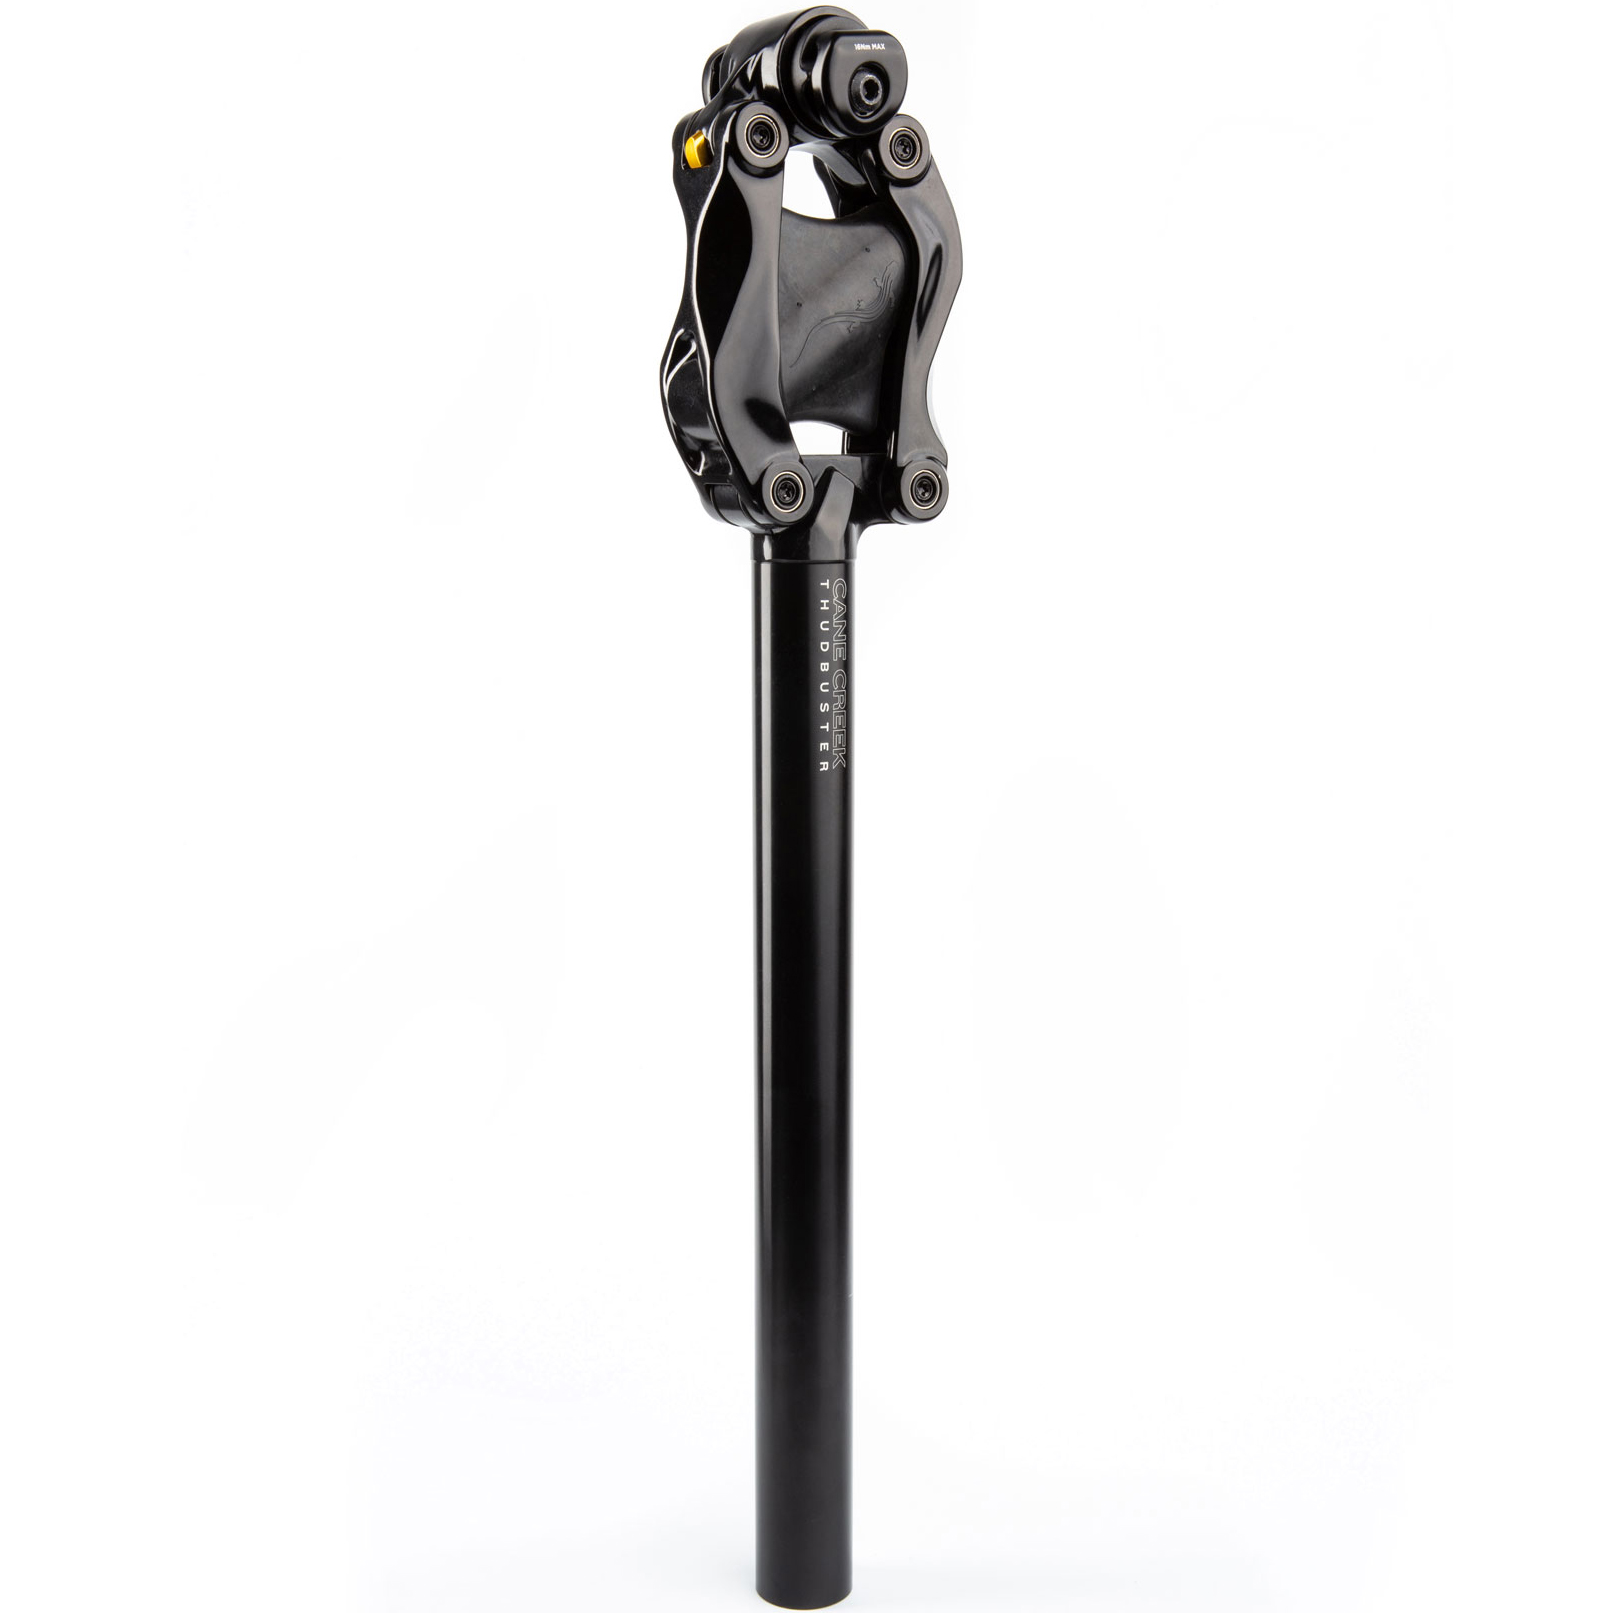 Picture of Cane Creek Thudbuster G4 LT Seatpost - 420mm - Ø 31.6 mm